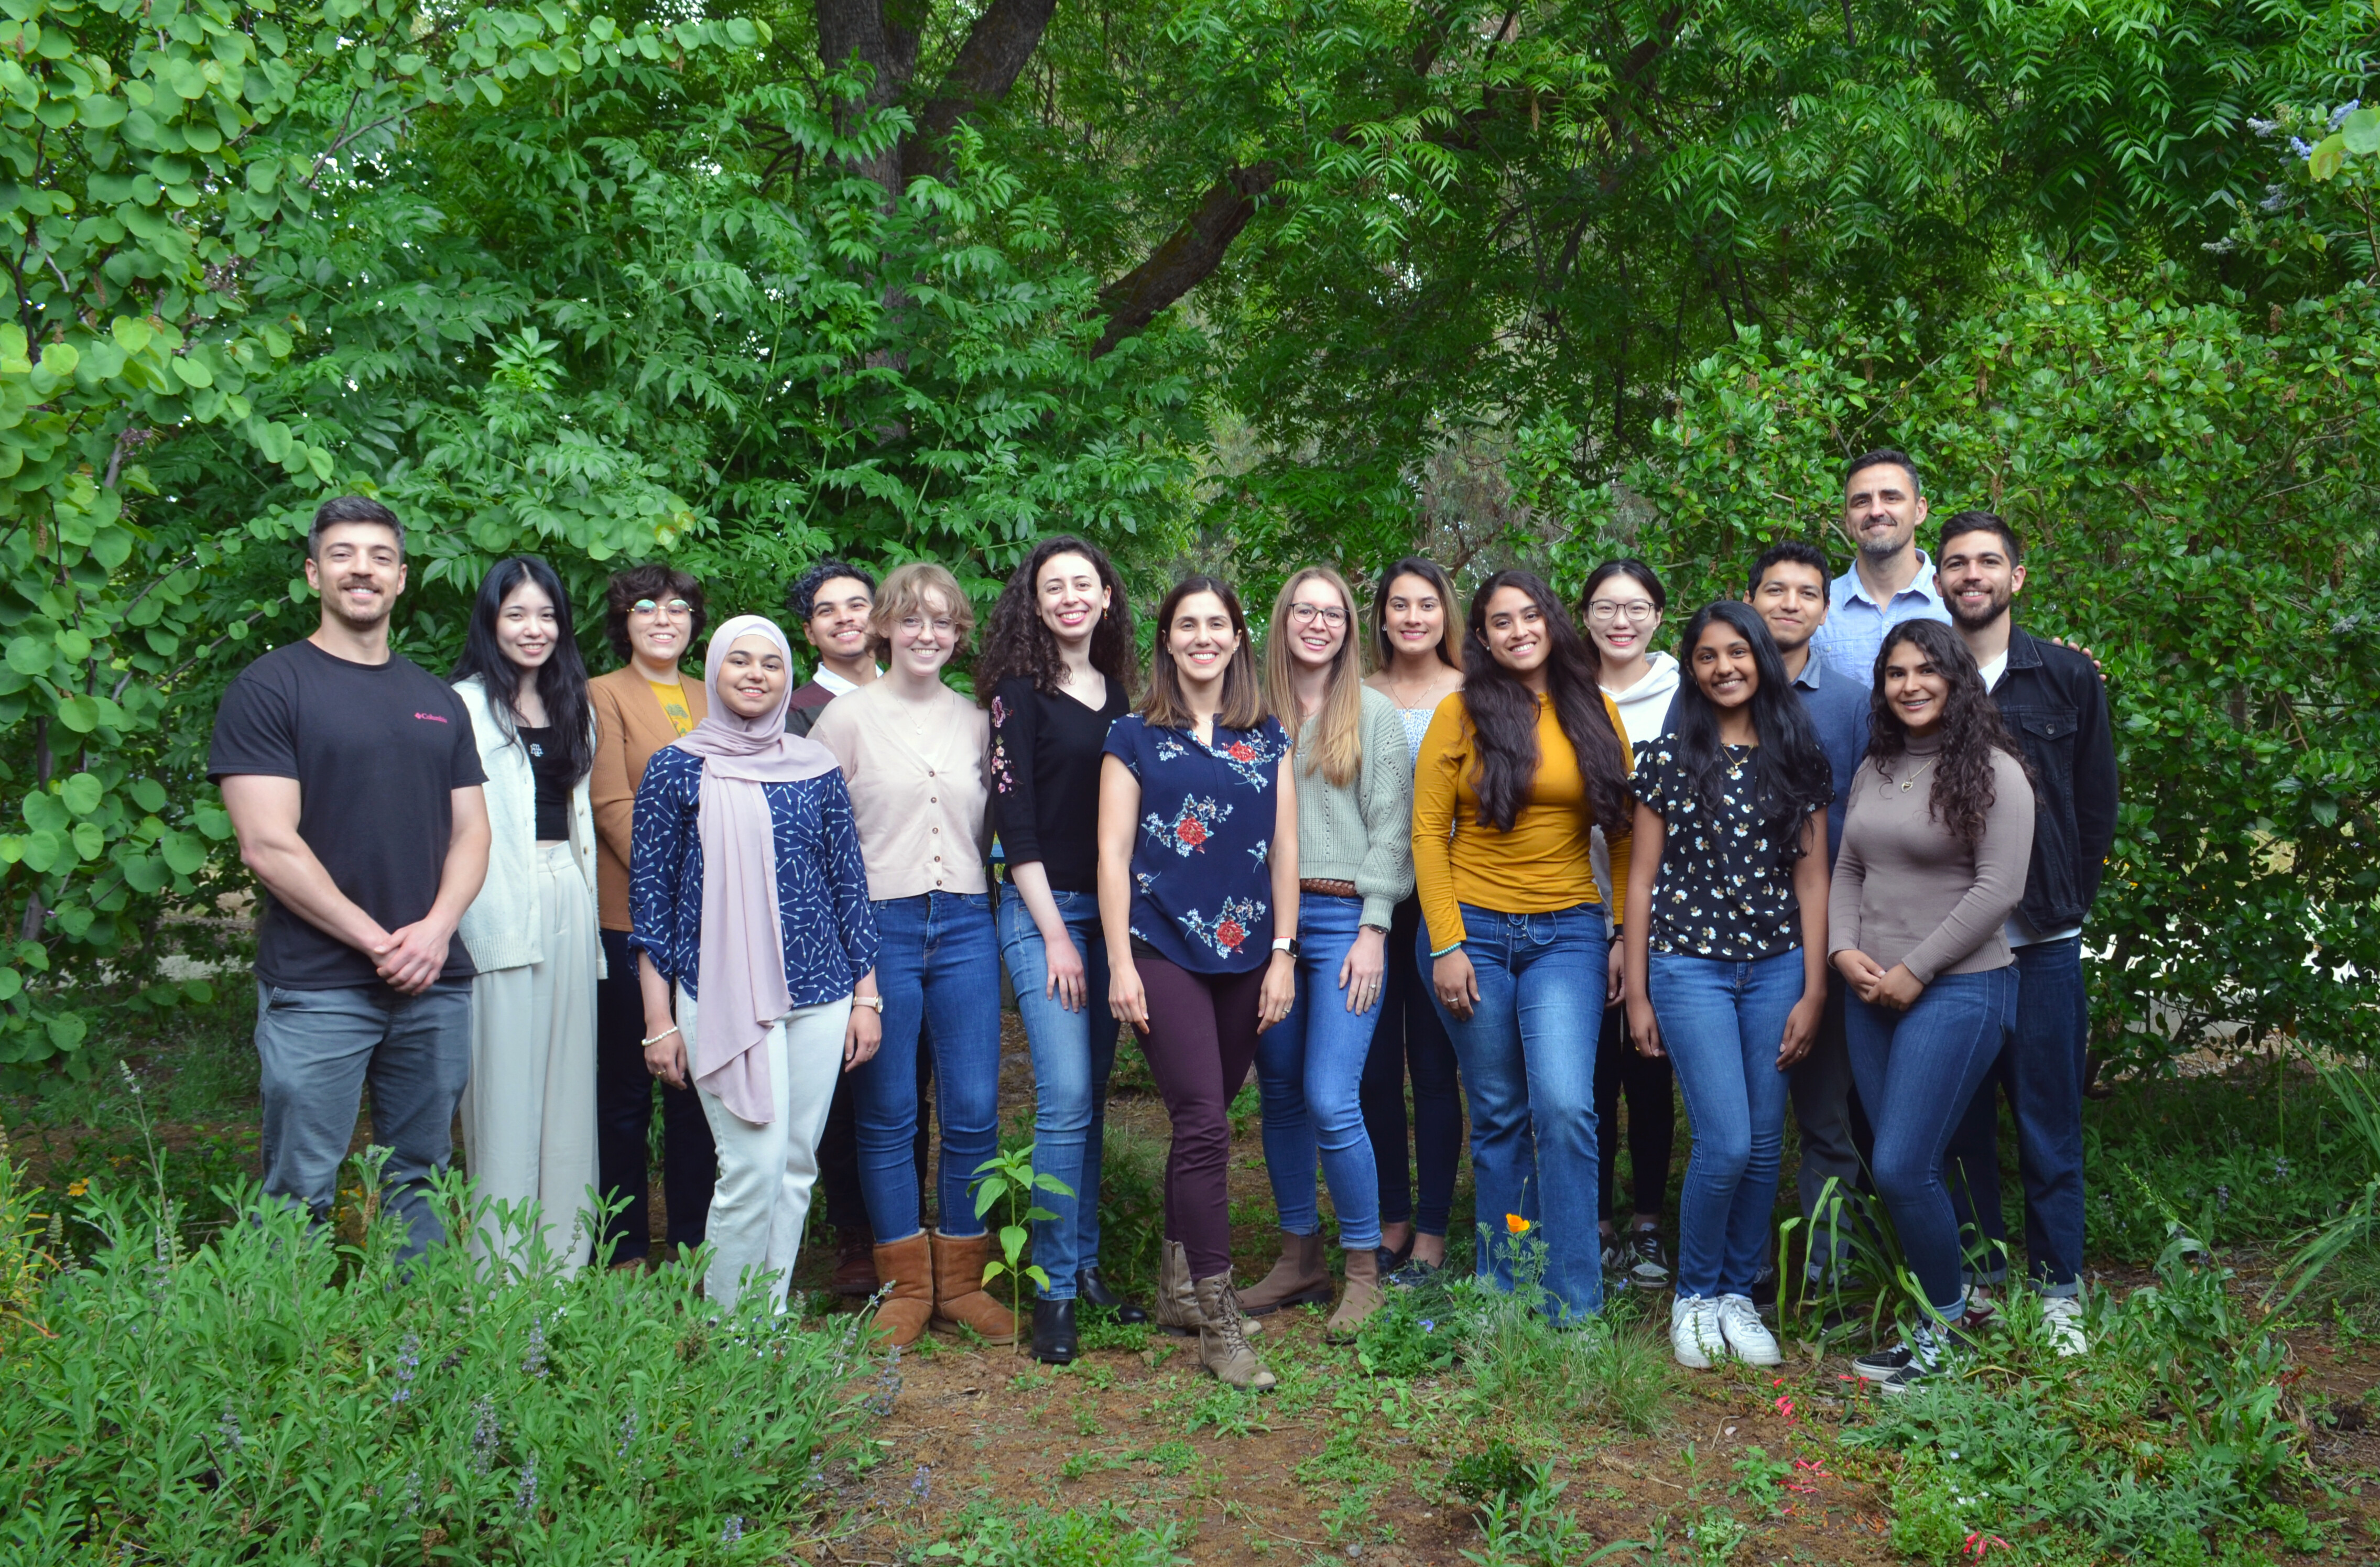 Dr. Bárbara Blanco-Ulate (center) and her lab group standing together and smiling in front of some trees.